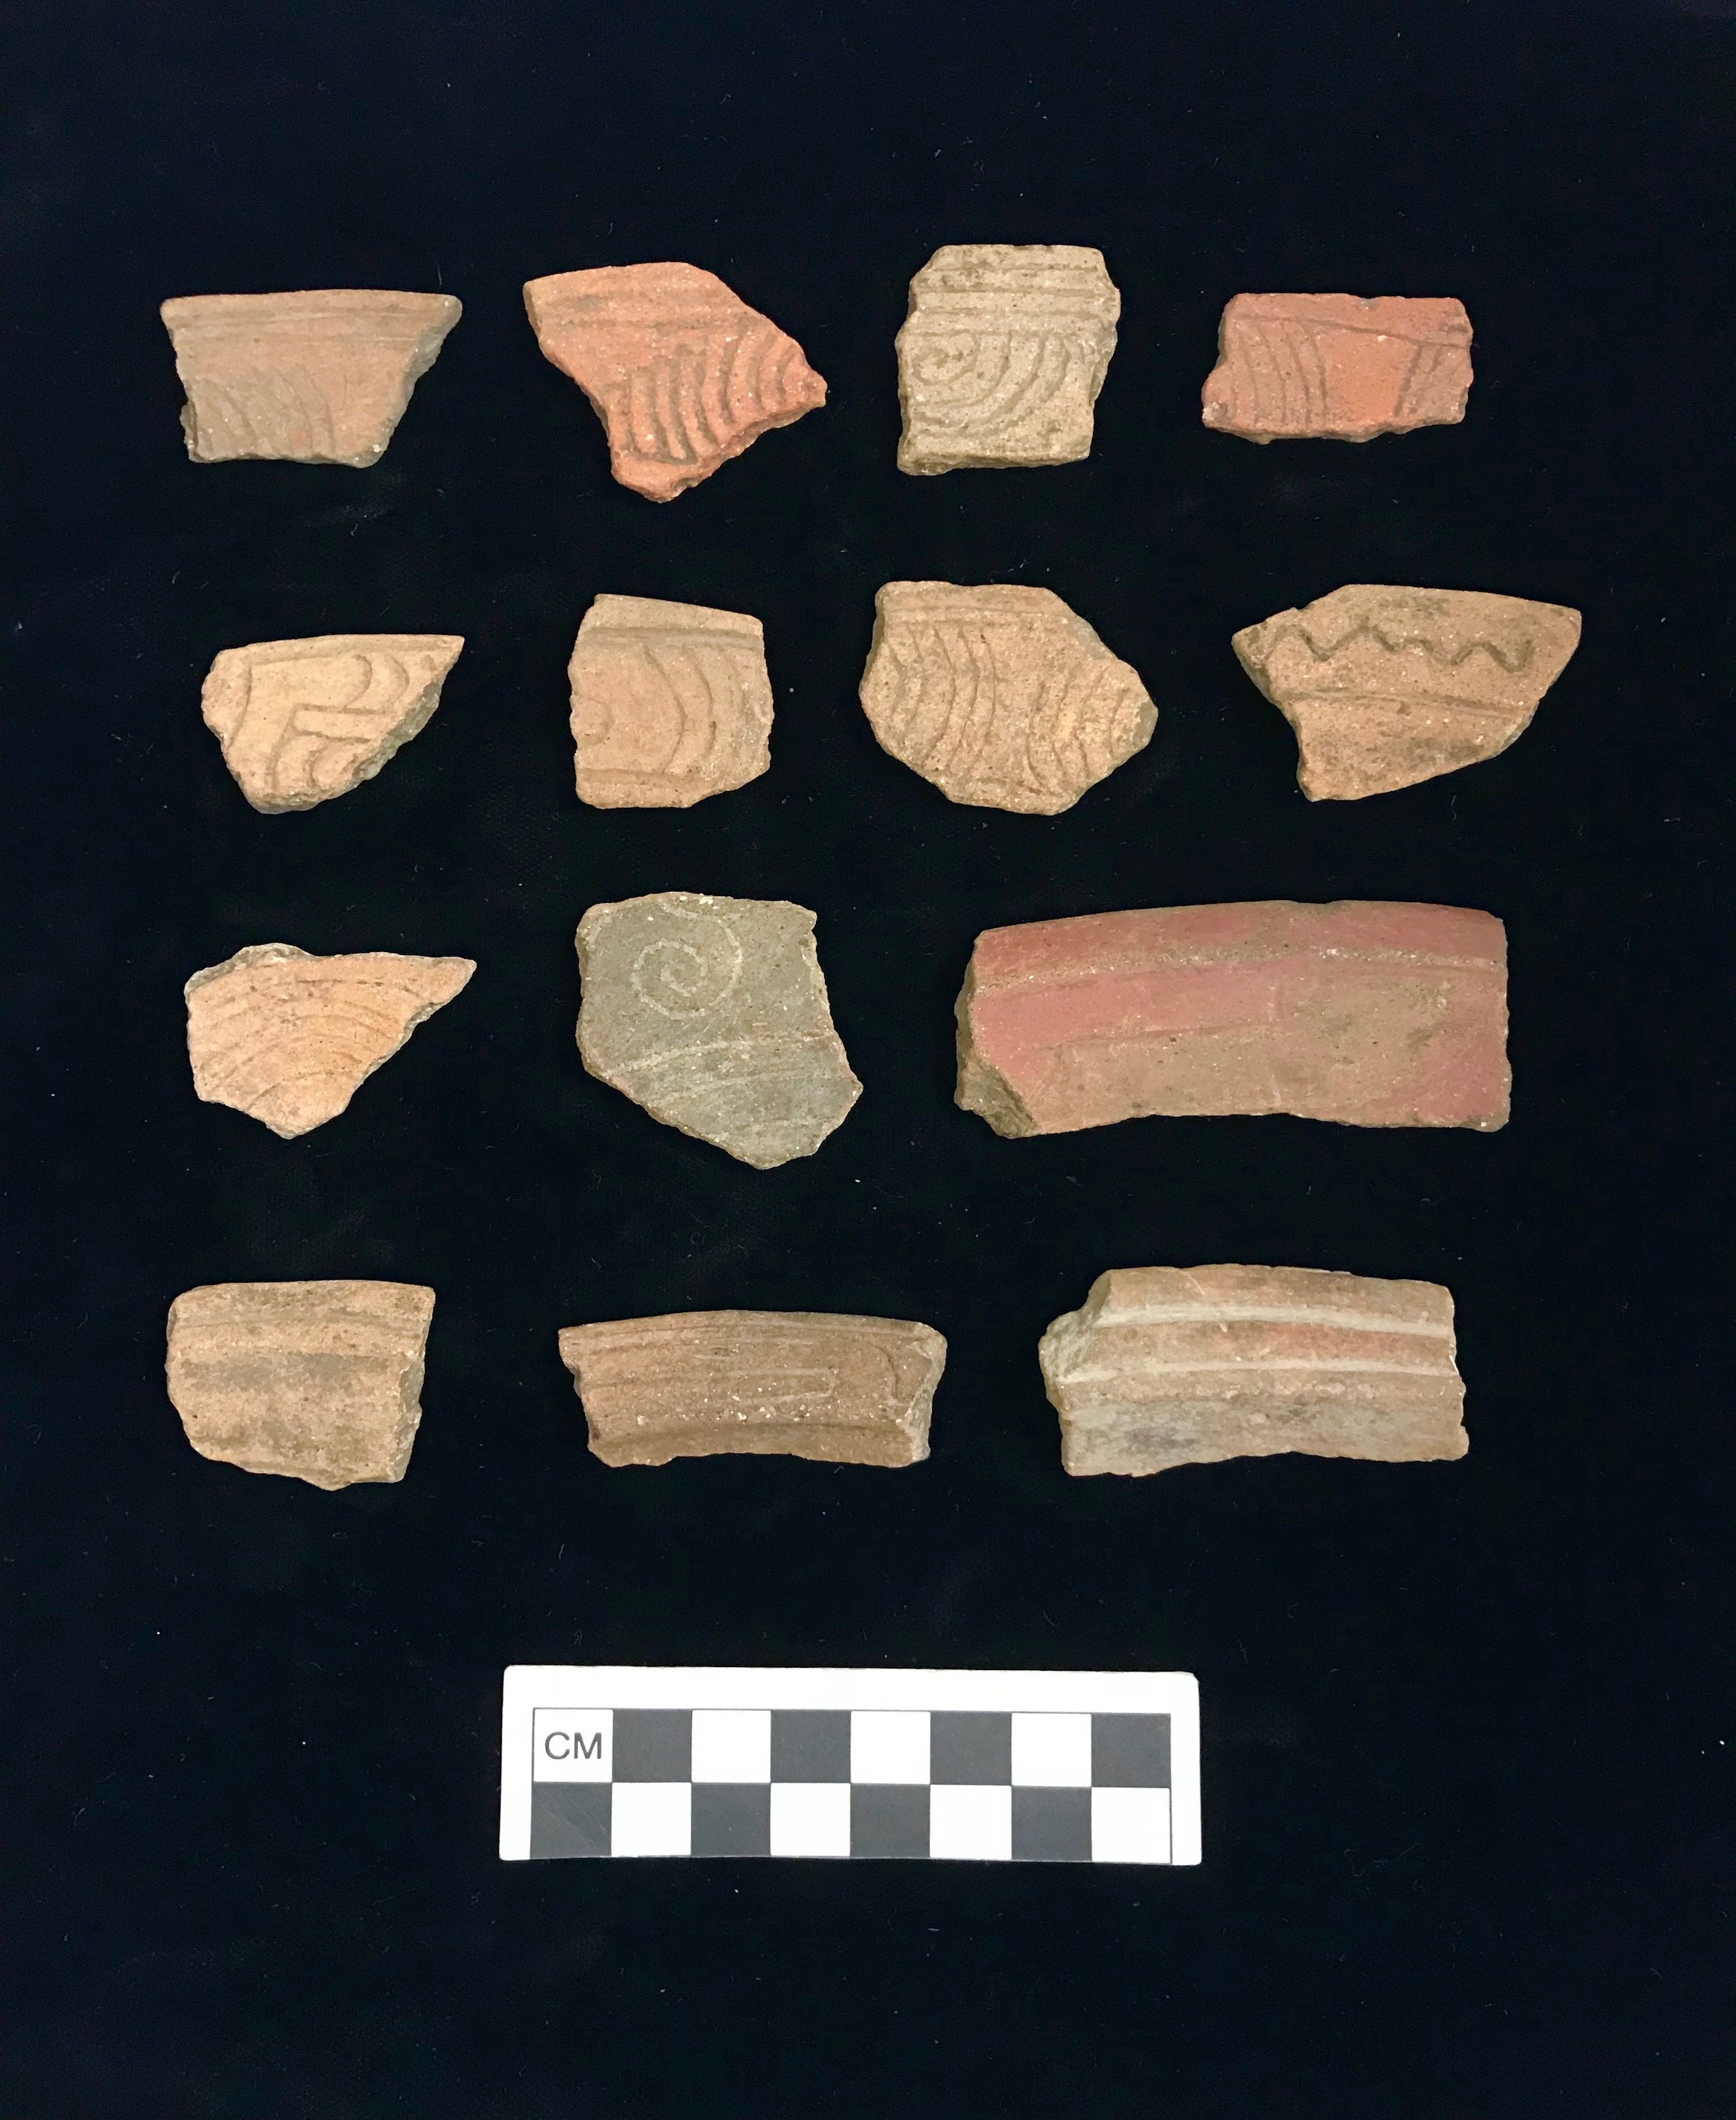 Plate VI. MISCELLANEOUS INCISED SHERDS. Pearls Inner Rim Incised (1-8) and Incised Bowl (9-10); Simon Zone Painted (11), Lip Incised (12-13), and Broad Lined Incised (14). FLMNH Acc. Nos. 97986, 97990, 97993, and 97995.